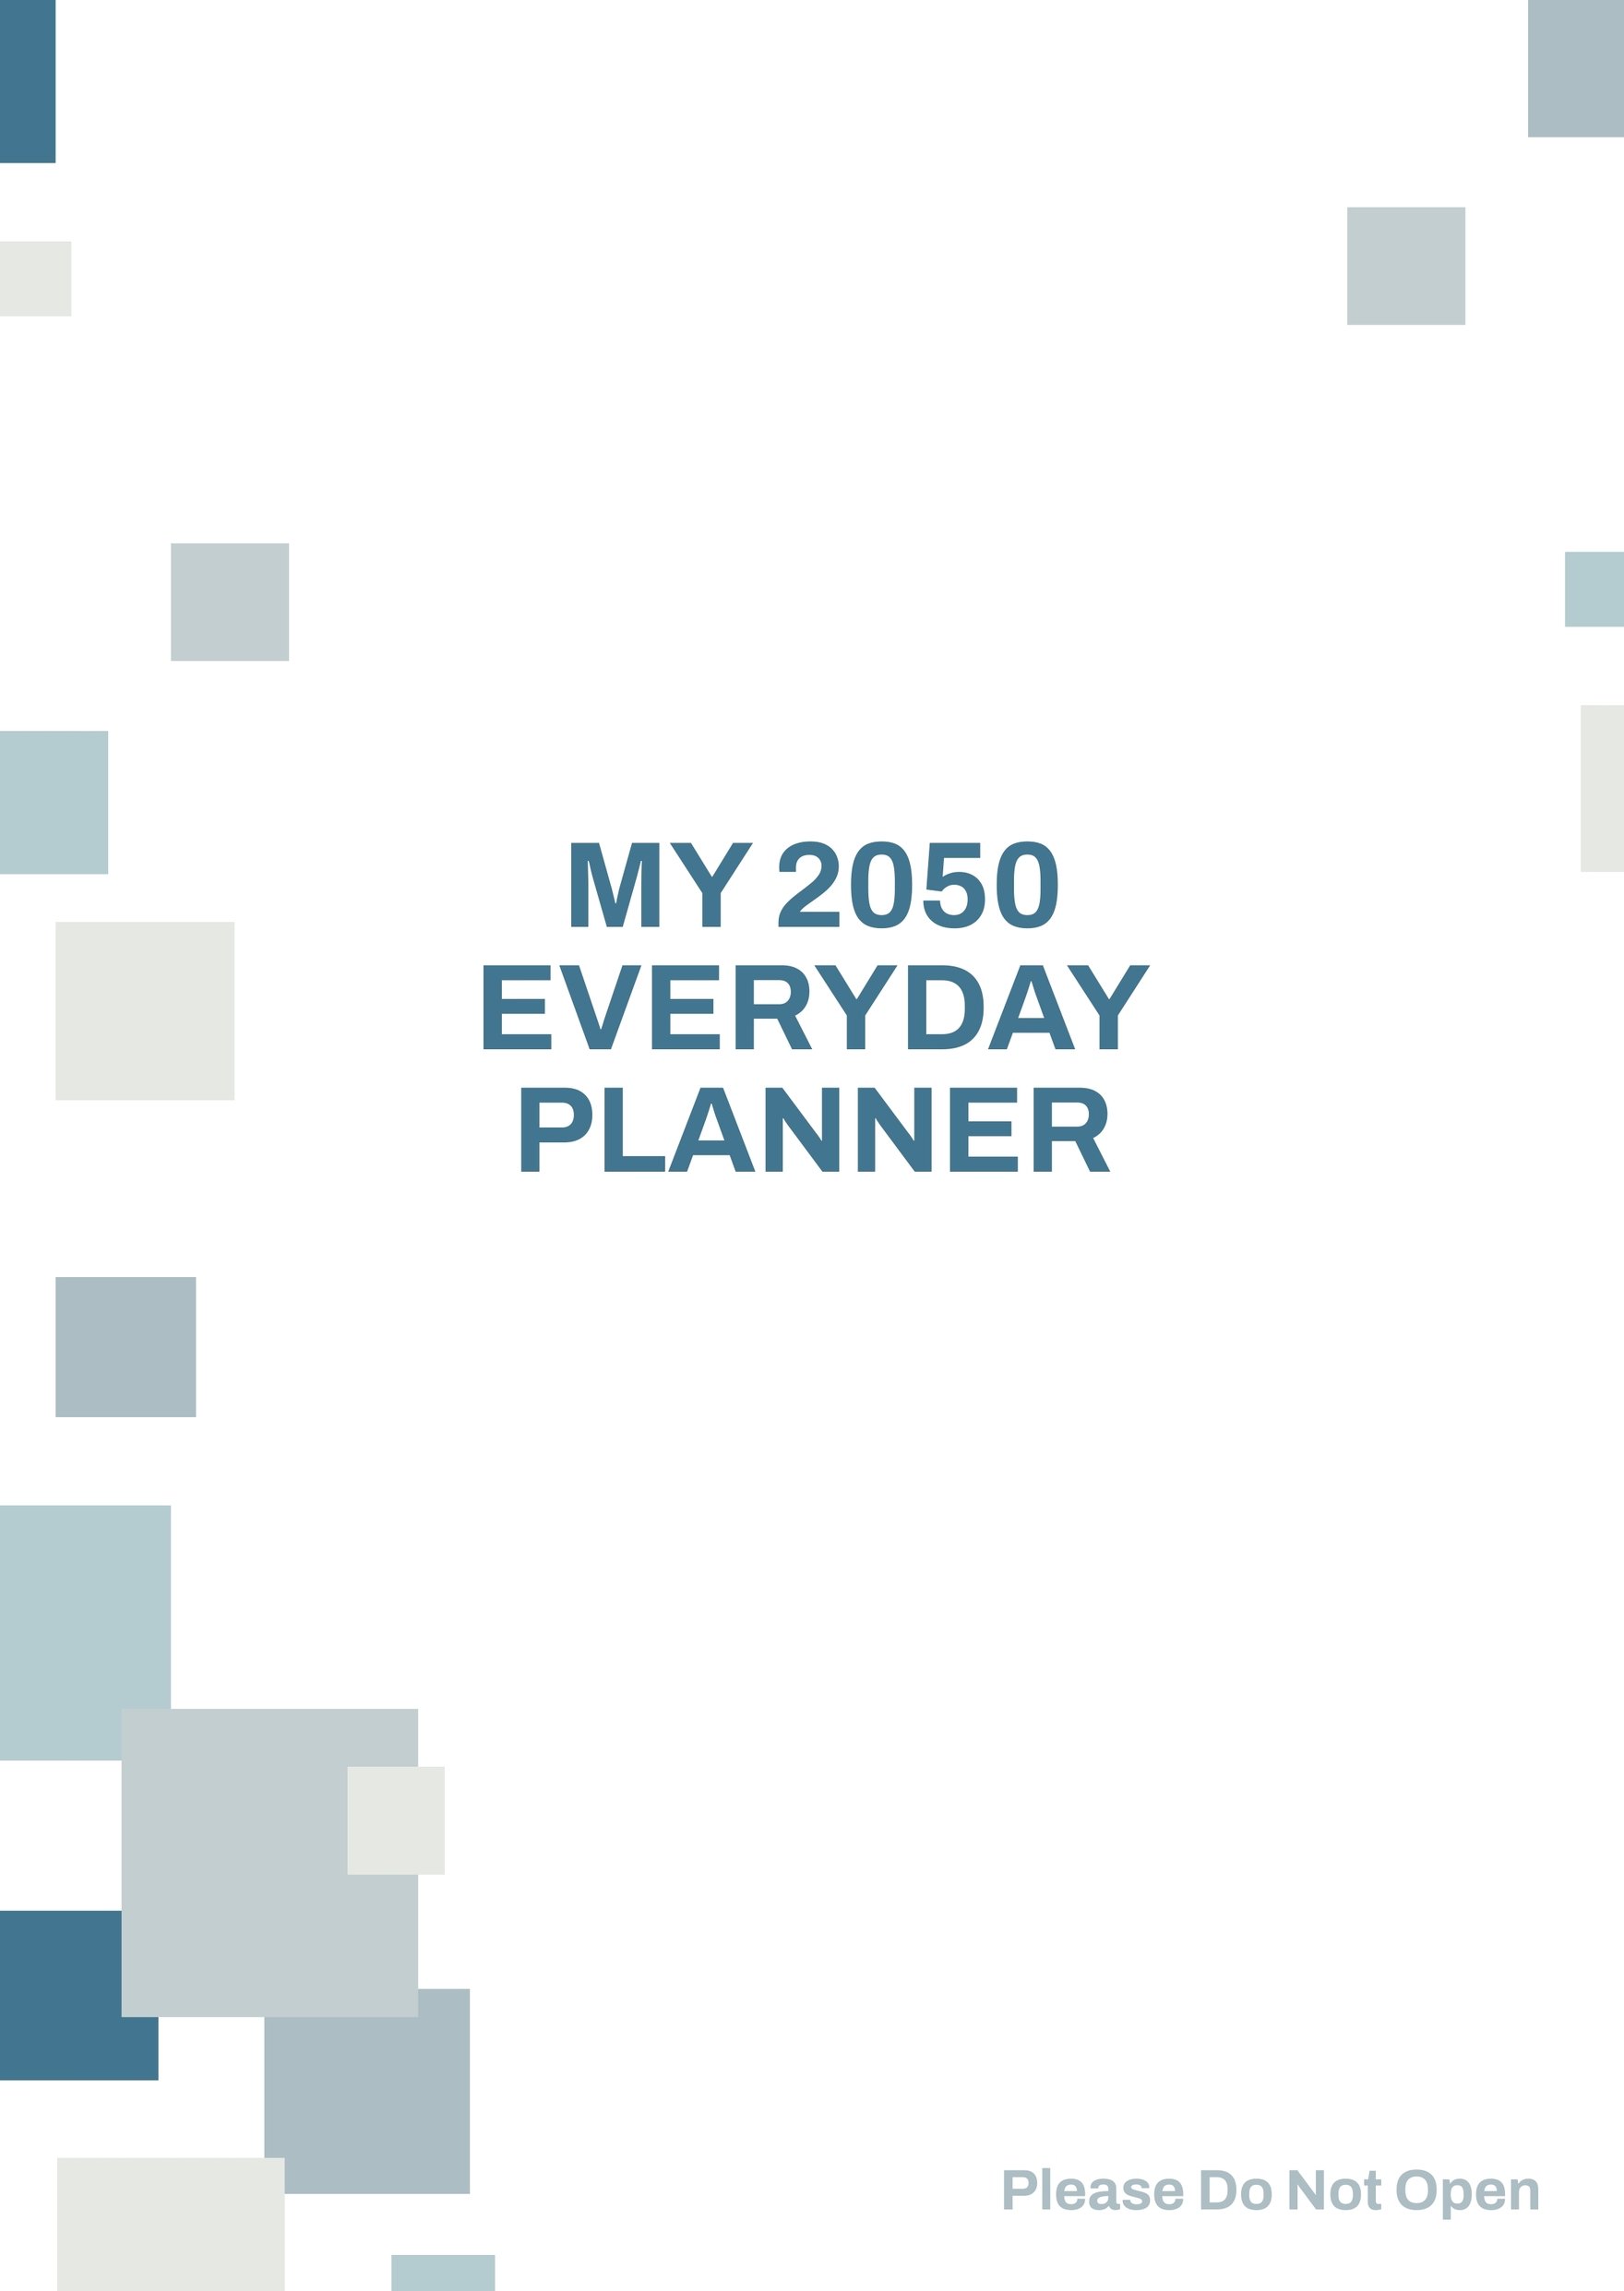 Free Personal Planner Cover Template